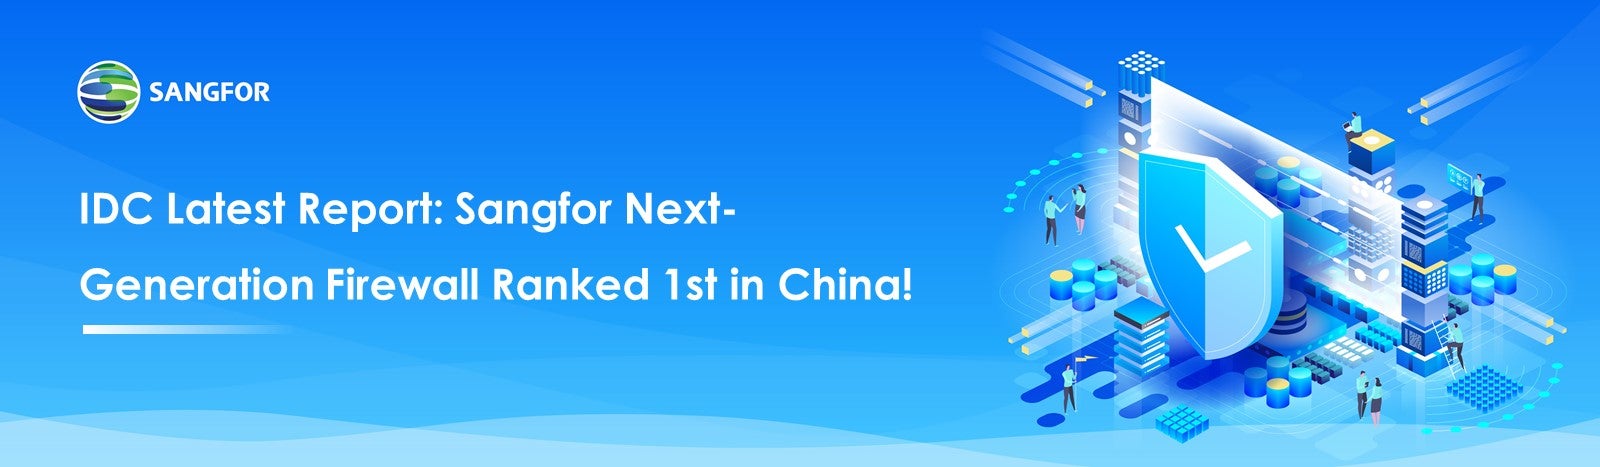 IDC Report: Sangfor Next-Generation Firewall Ranked 1st in China! 1